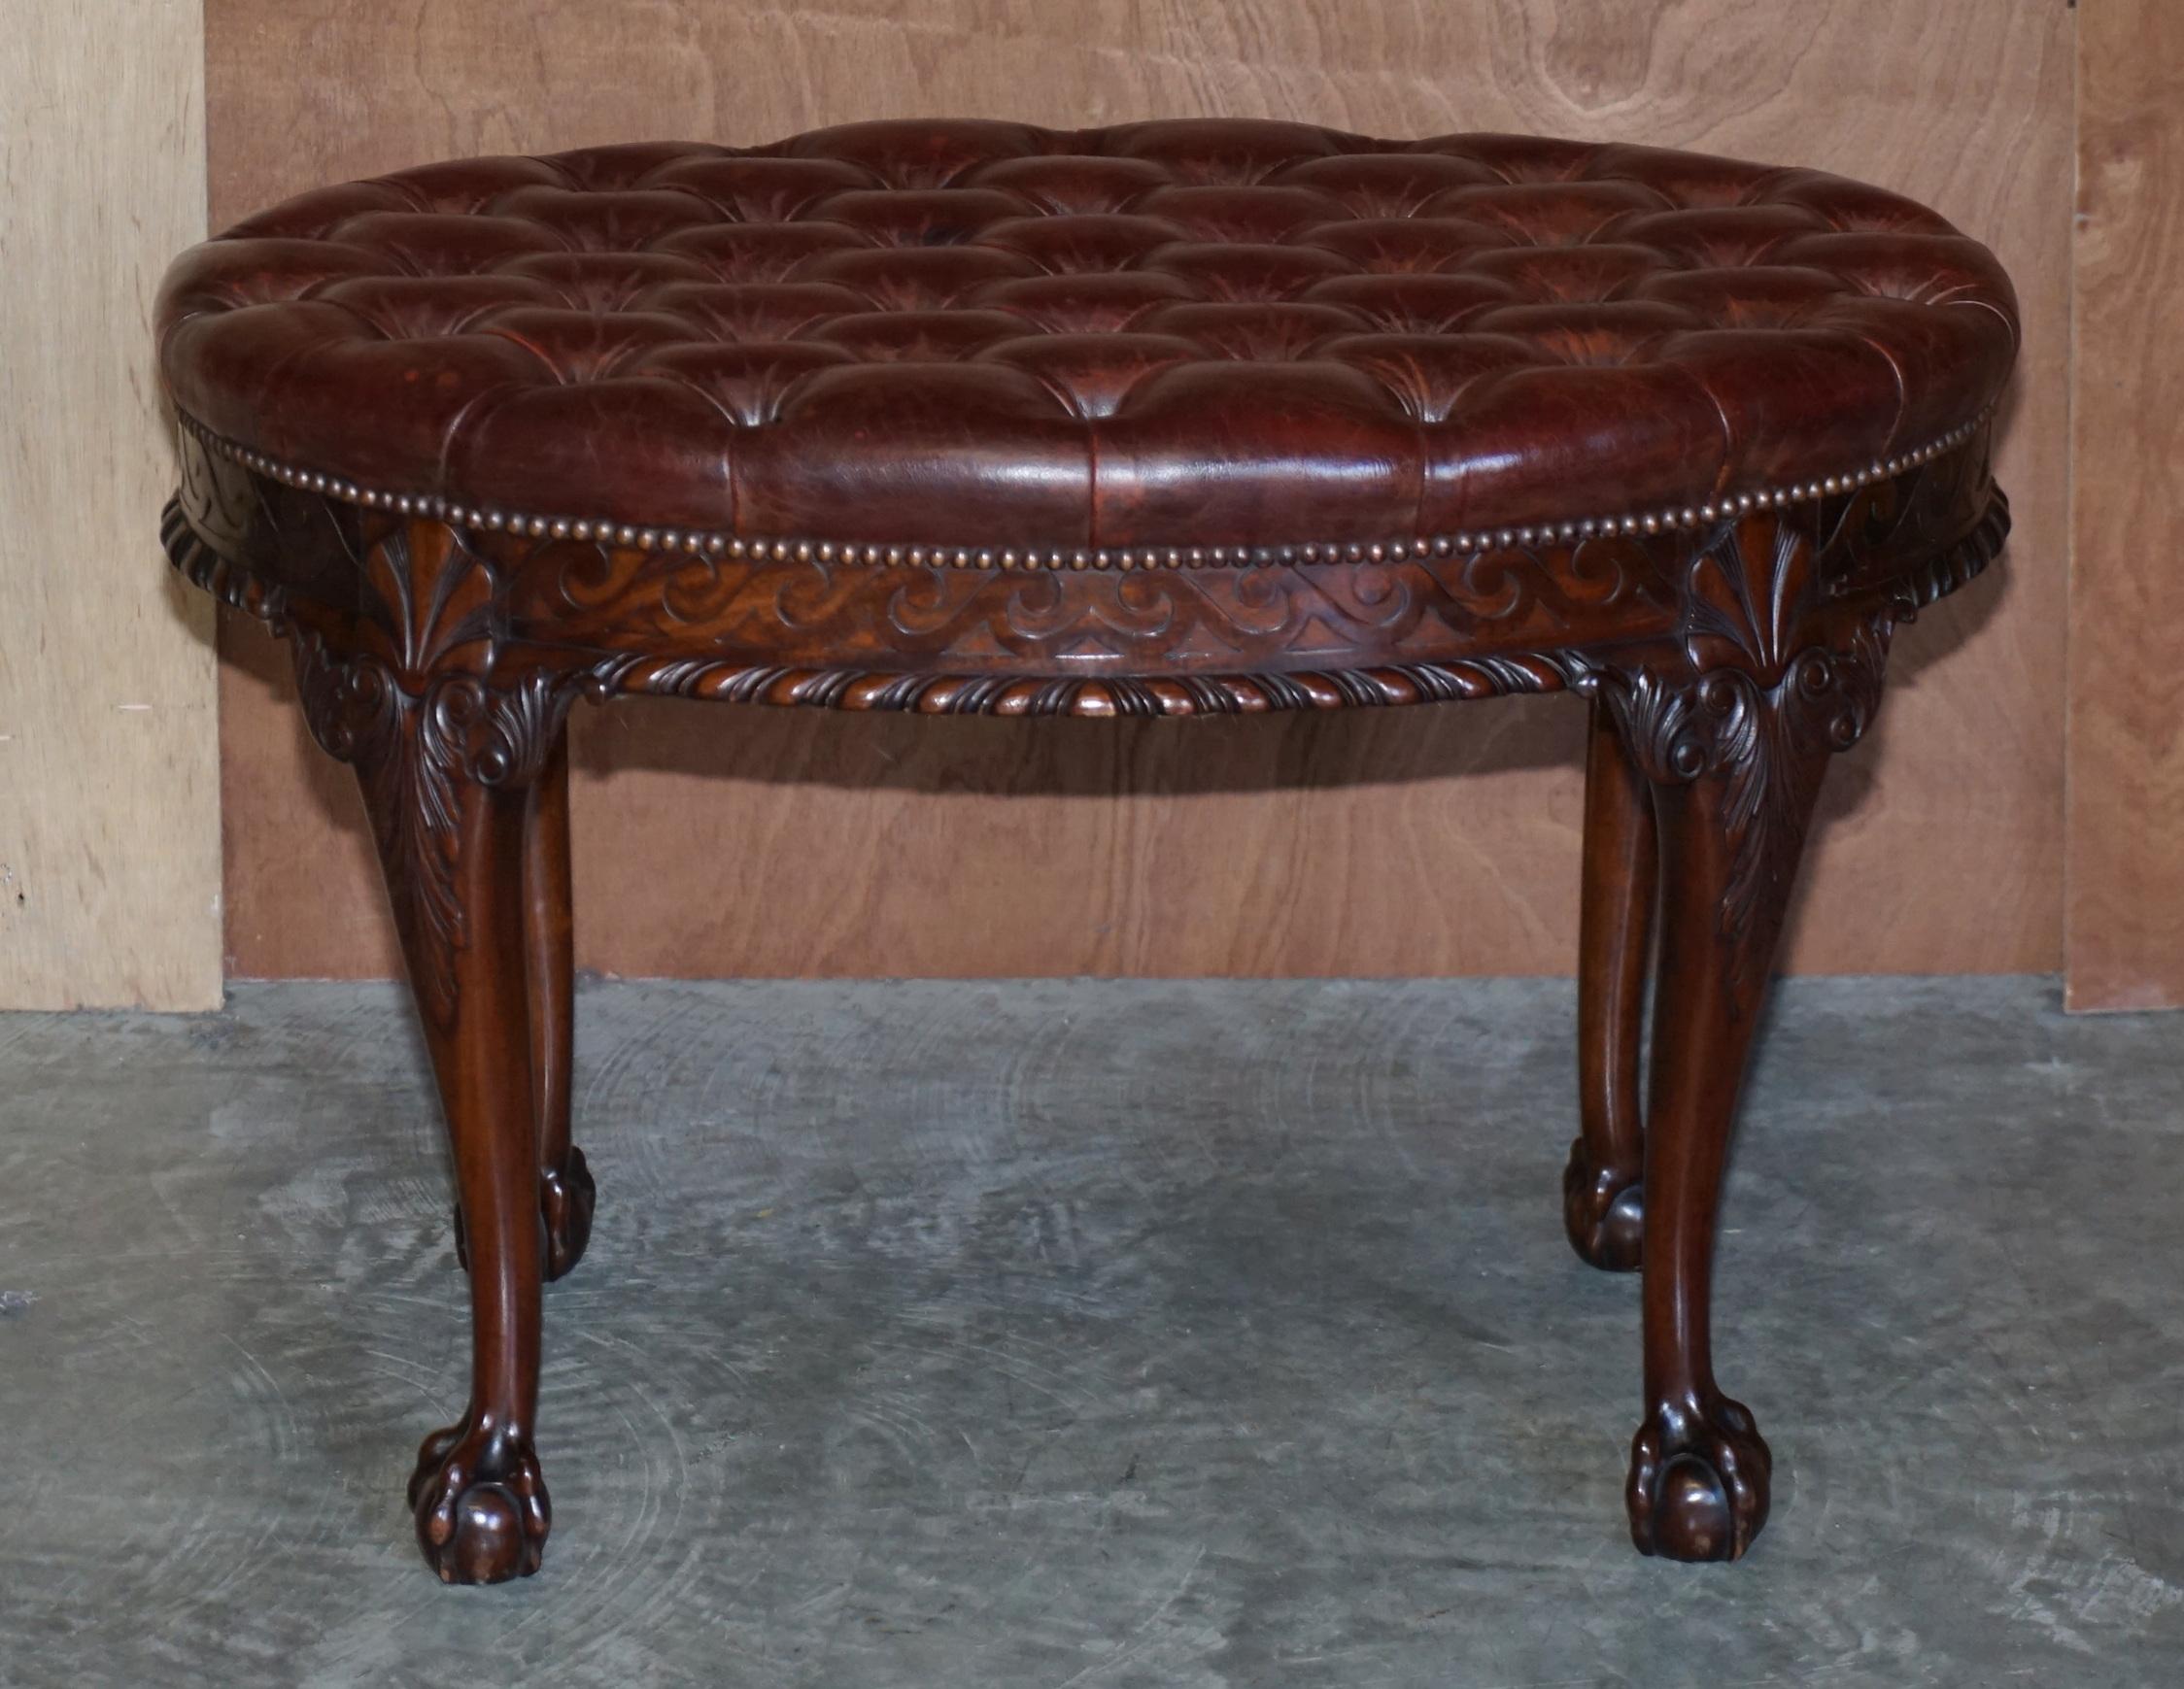 We are delighted to offer this exquisite F Parker & Sons LTD circa 1900 fully stamped Mahogany framed , Claw & Ball feet bench stool with hand dyed Chesterfield brown leather upholstery circa 1900

A very decorative and expertly crafted piece, the